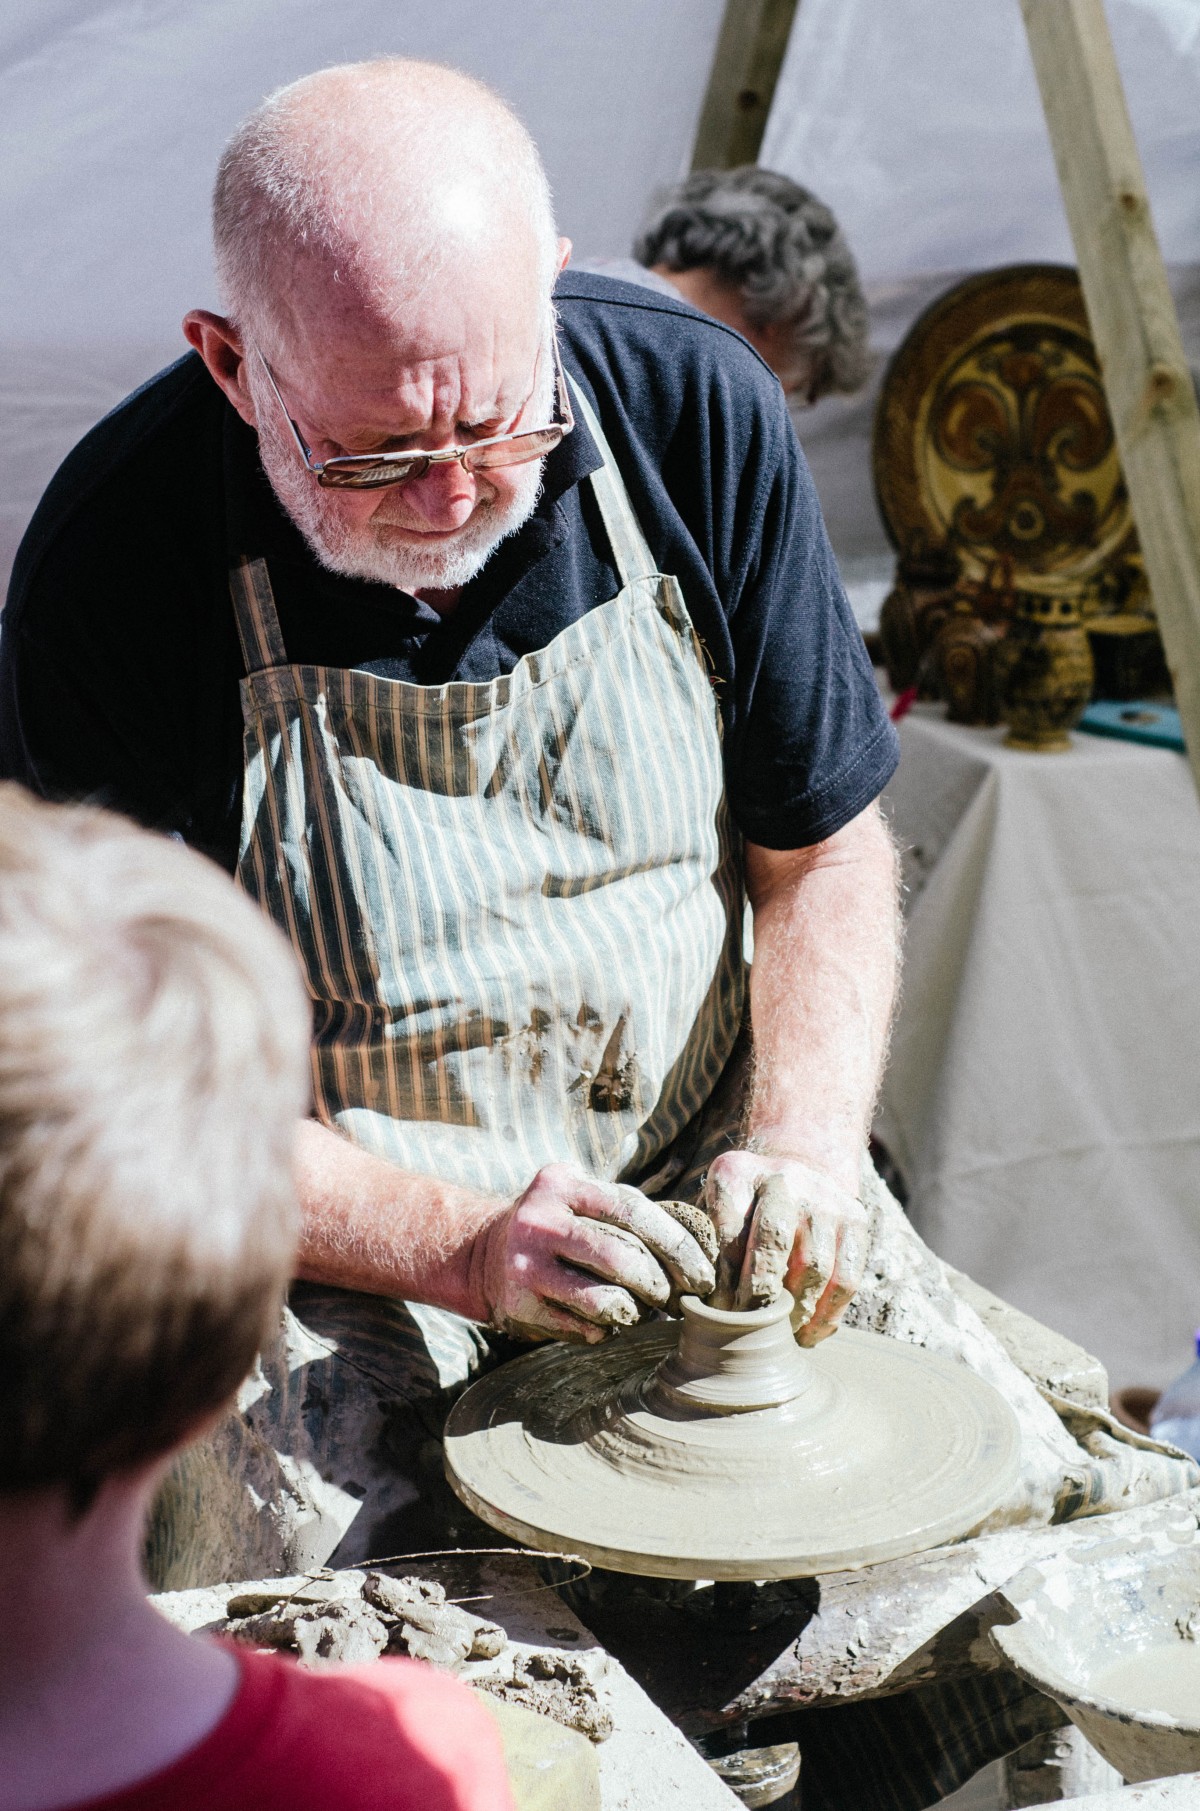 Learn how to make pottery like they would have 700 years ago! The treaty of Perth Celebrations were not only great fun but also gave people young and old the chance to learn a new skill, such as pottery!